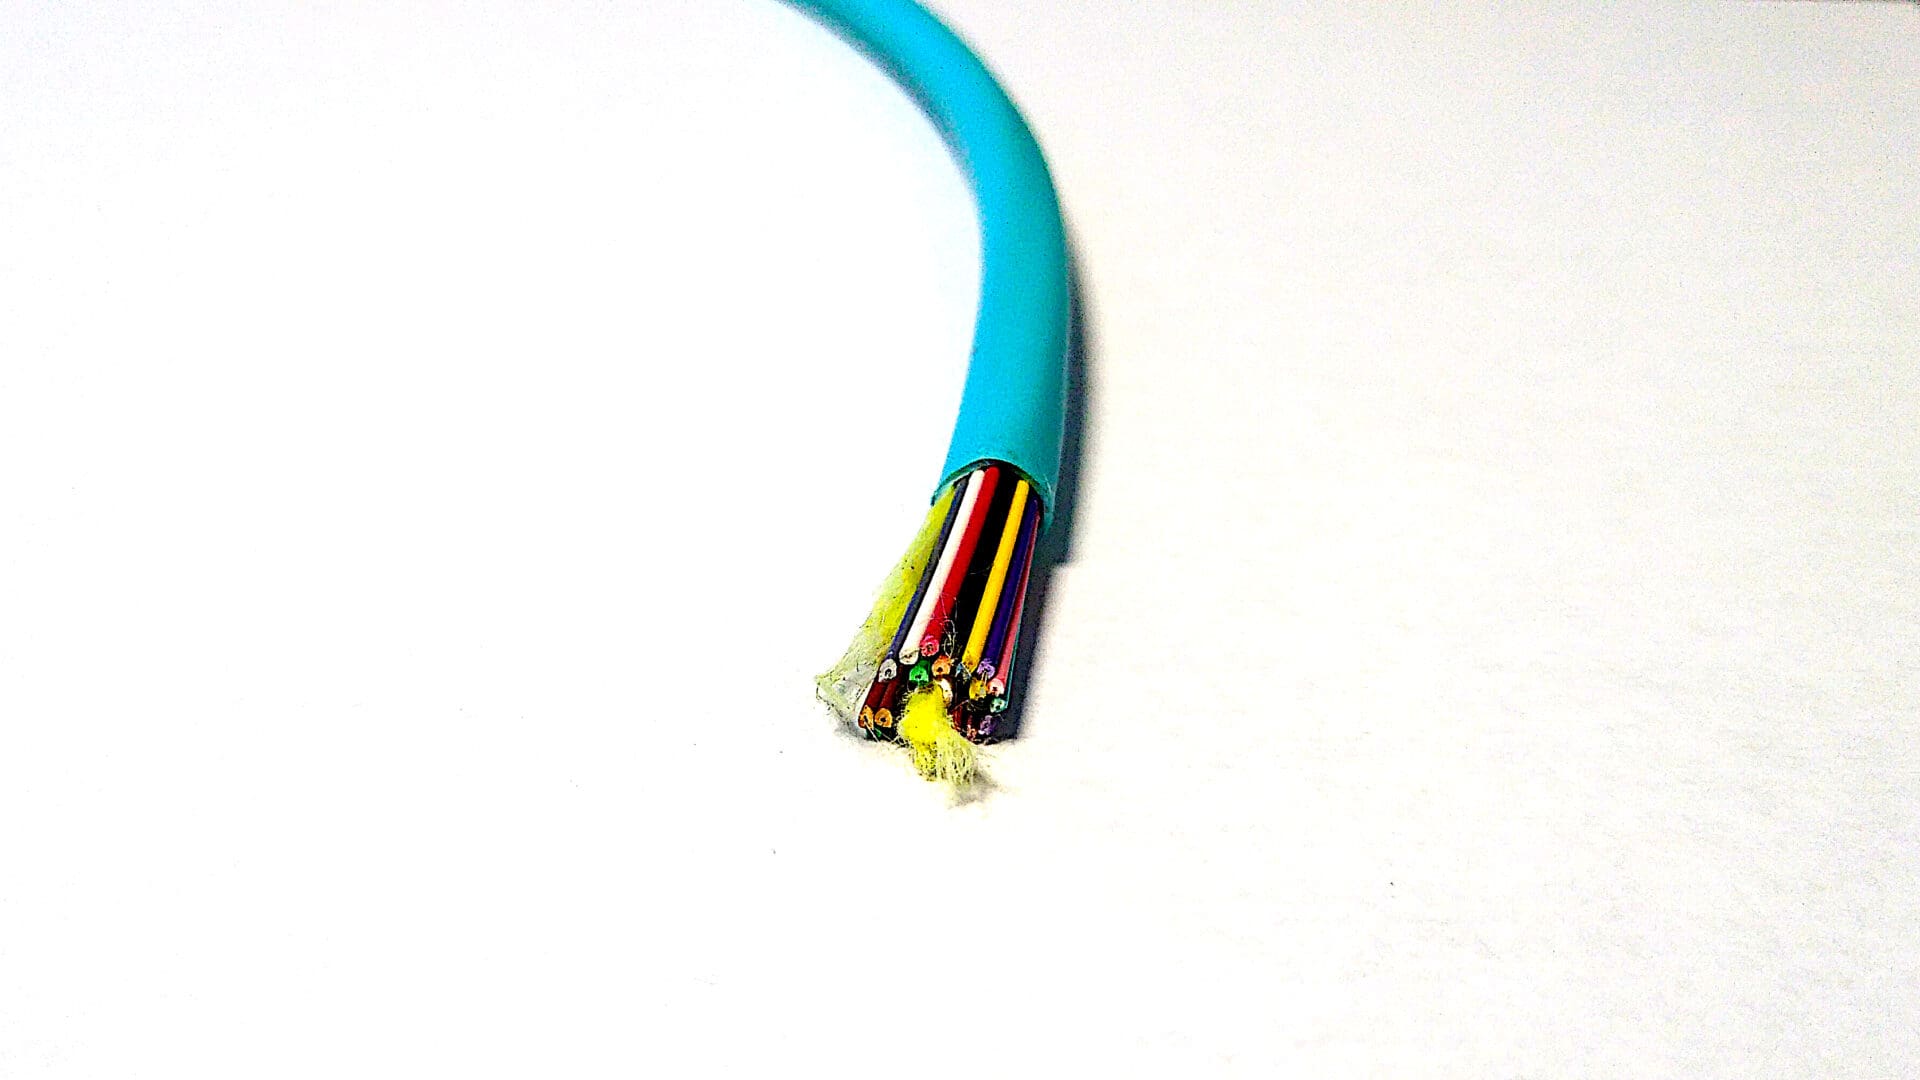 A FiOps300-24F - Aqua Blue cable with a wire attached to it.